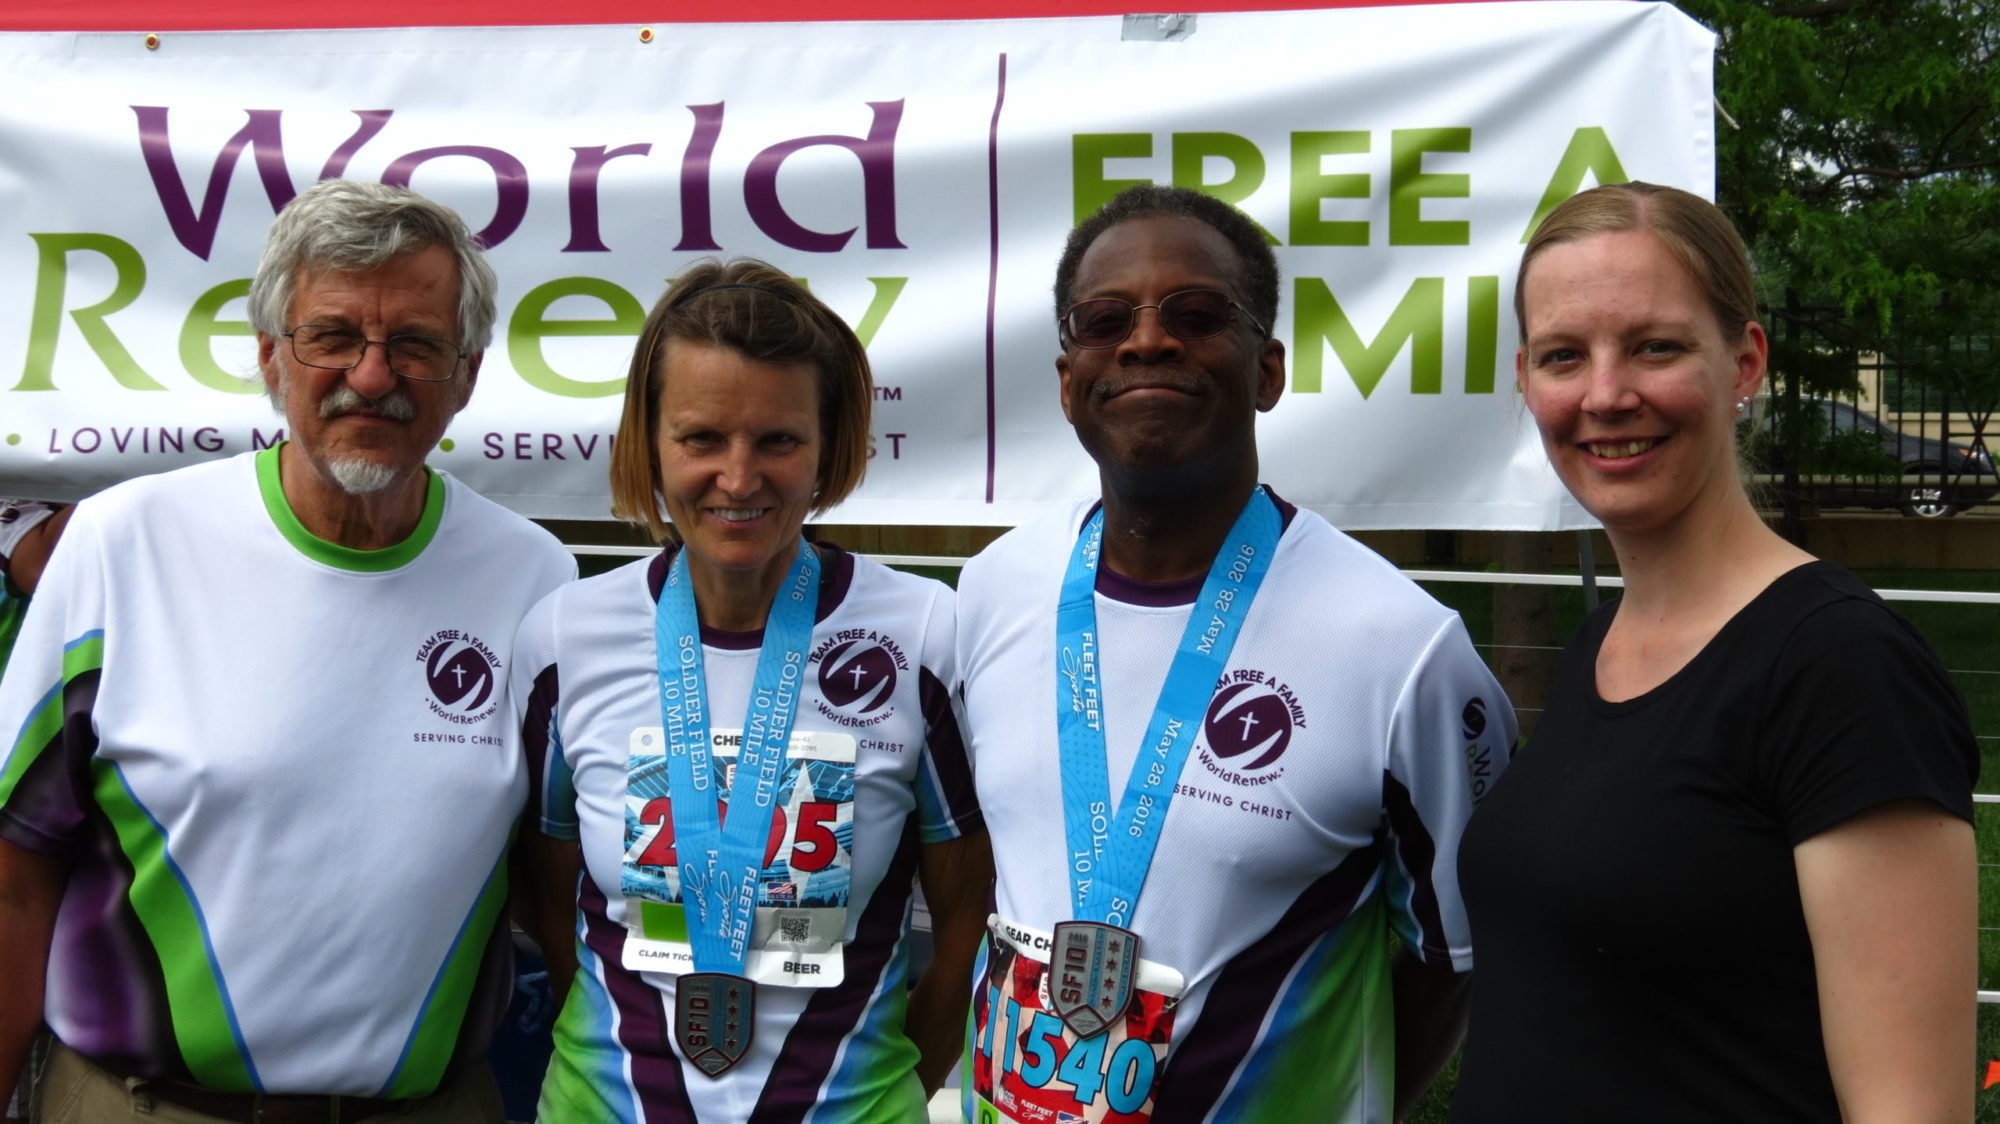 runners after finishing race for World Renew raised awareness of injustice 